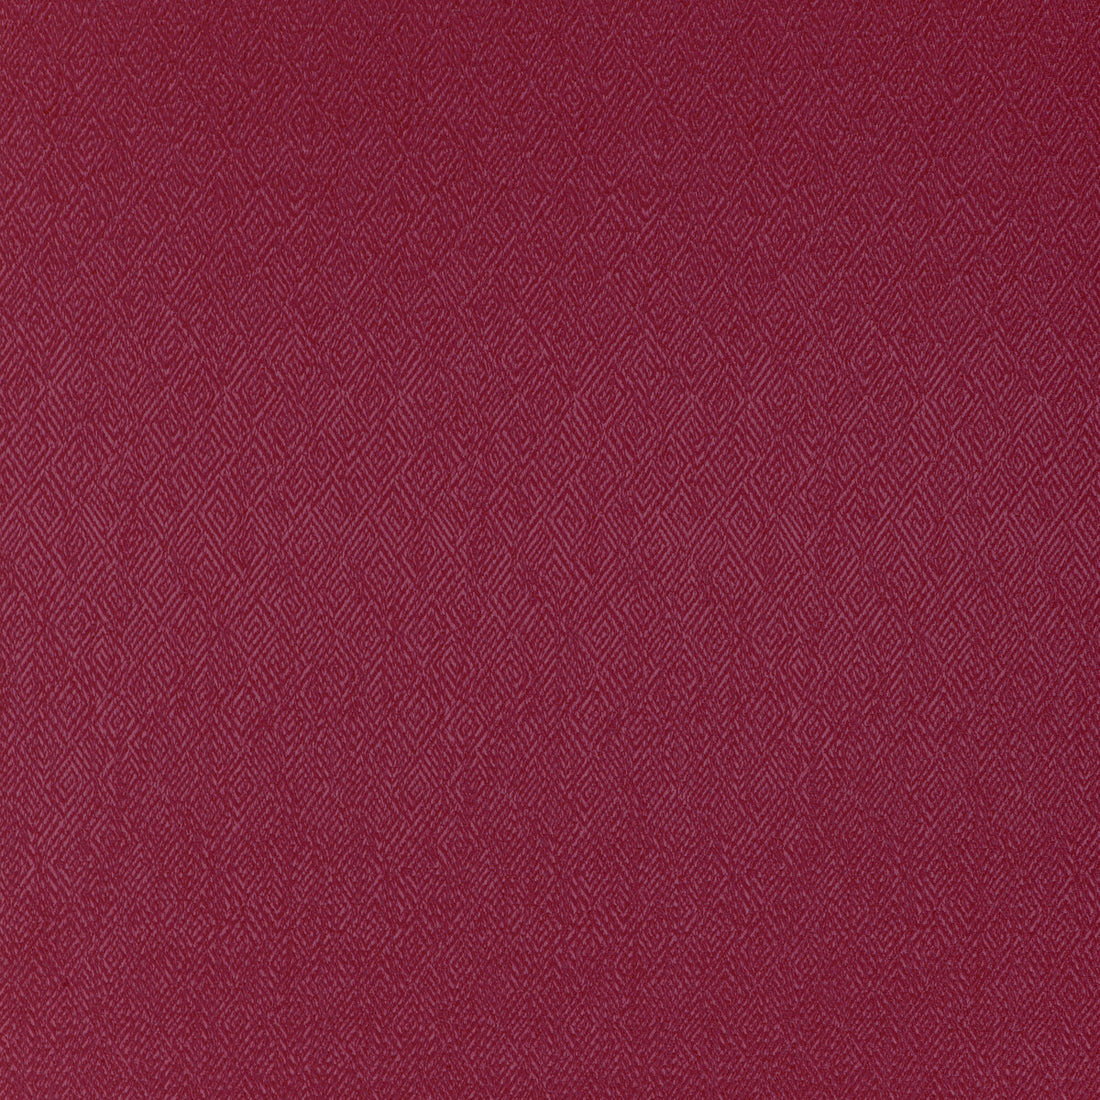 Pipet Texture fabric in red color - pattern 8023152.19.0 - by Brunschwig &amp; Fils in the Vienne Silks collection